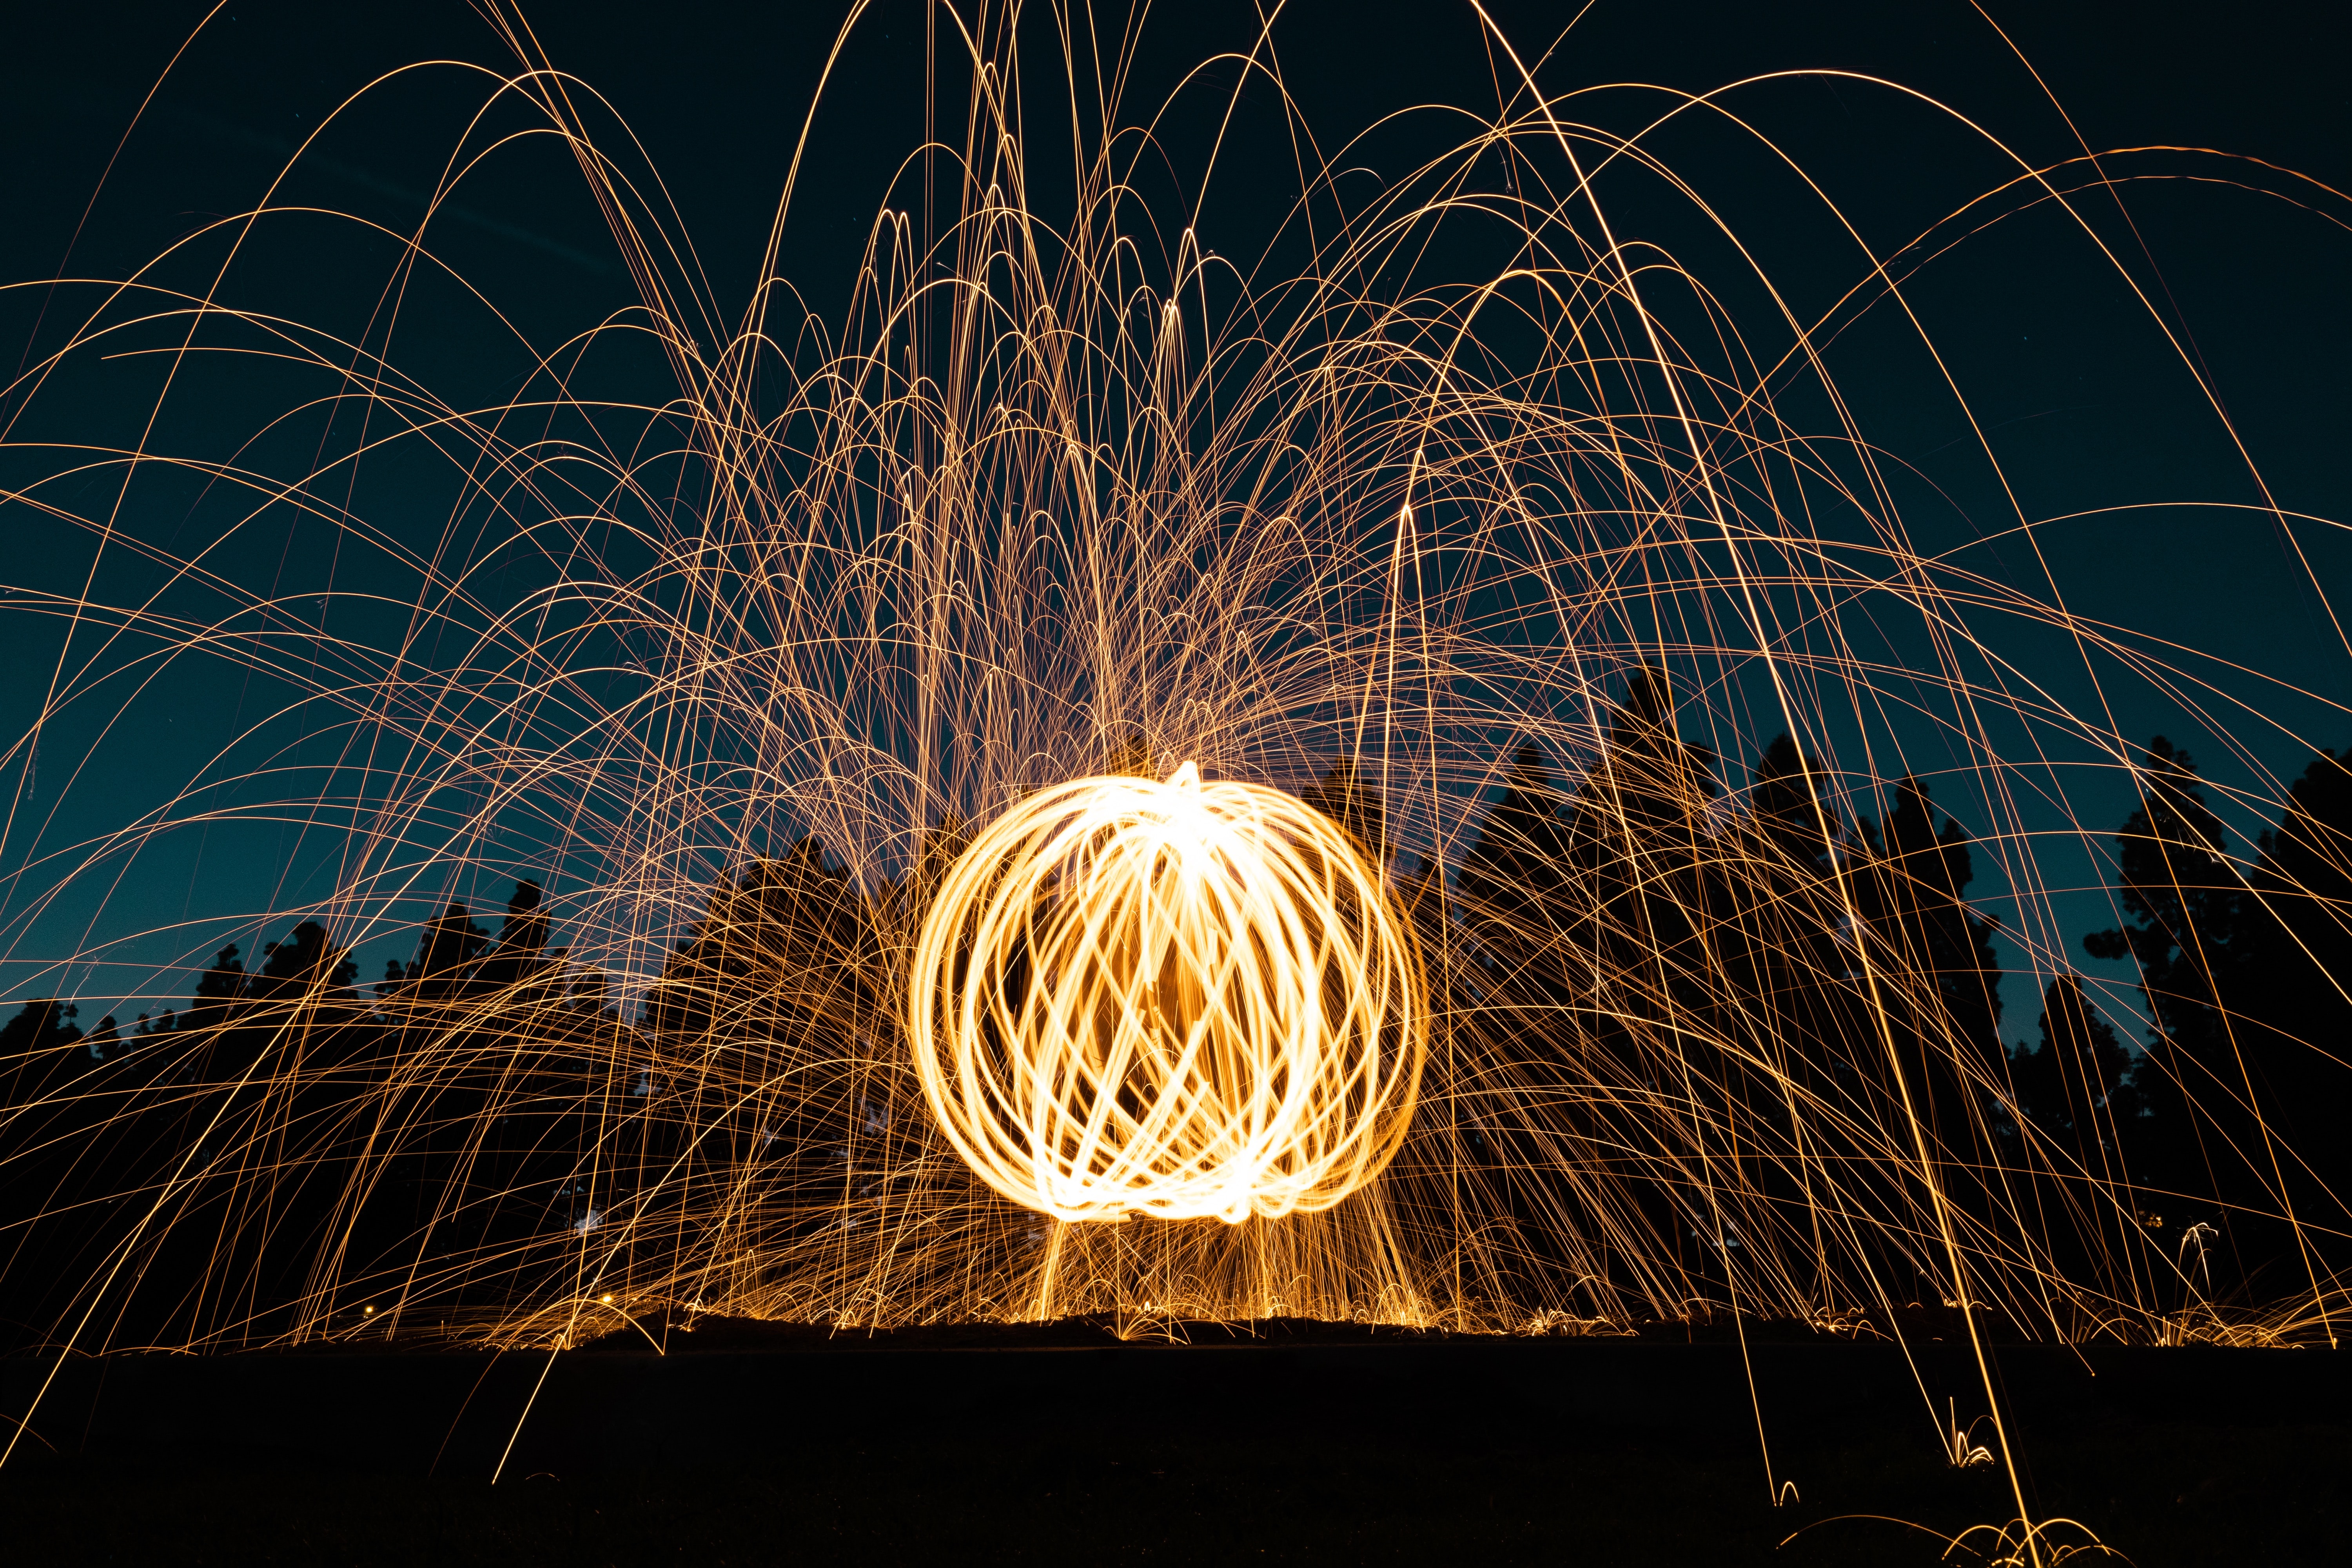 sparks, miscellanea, miscellaneous, ball, freezelight, glow High Definition image